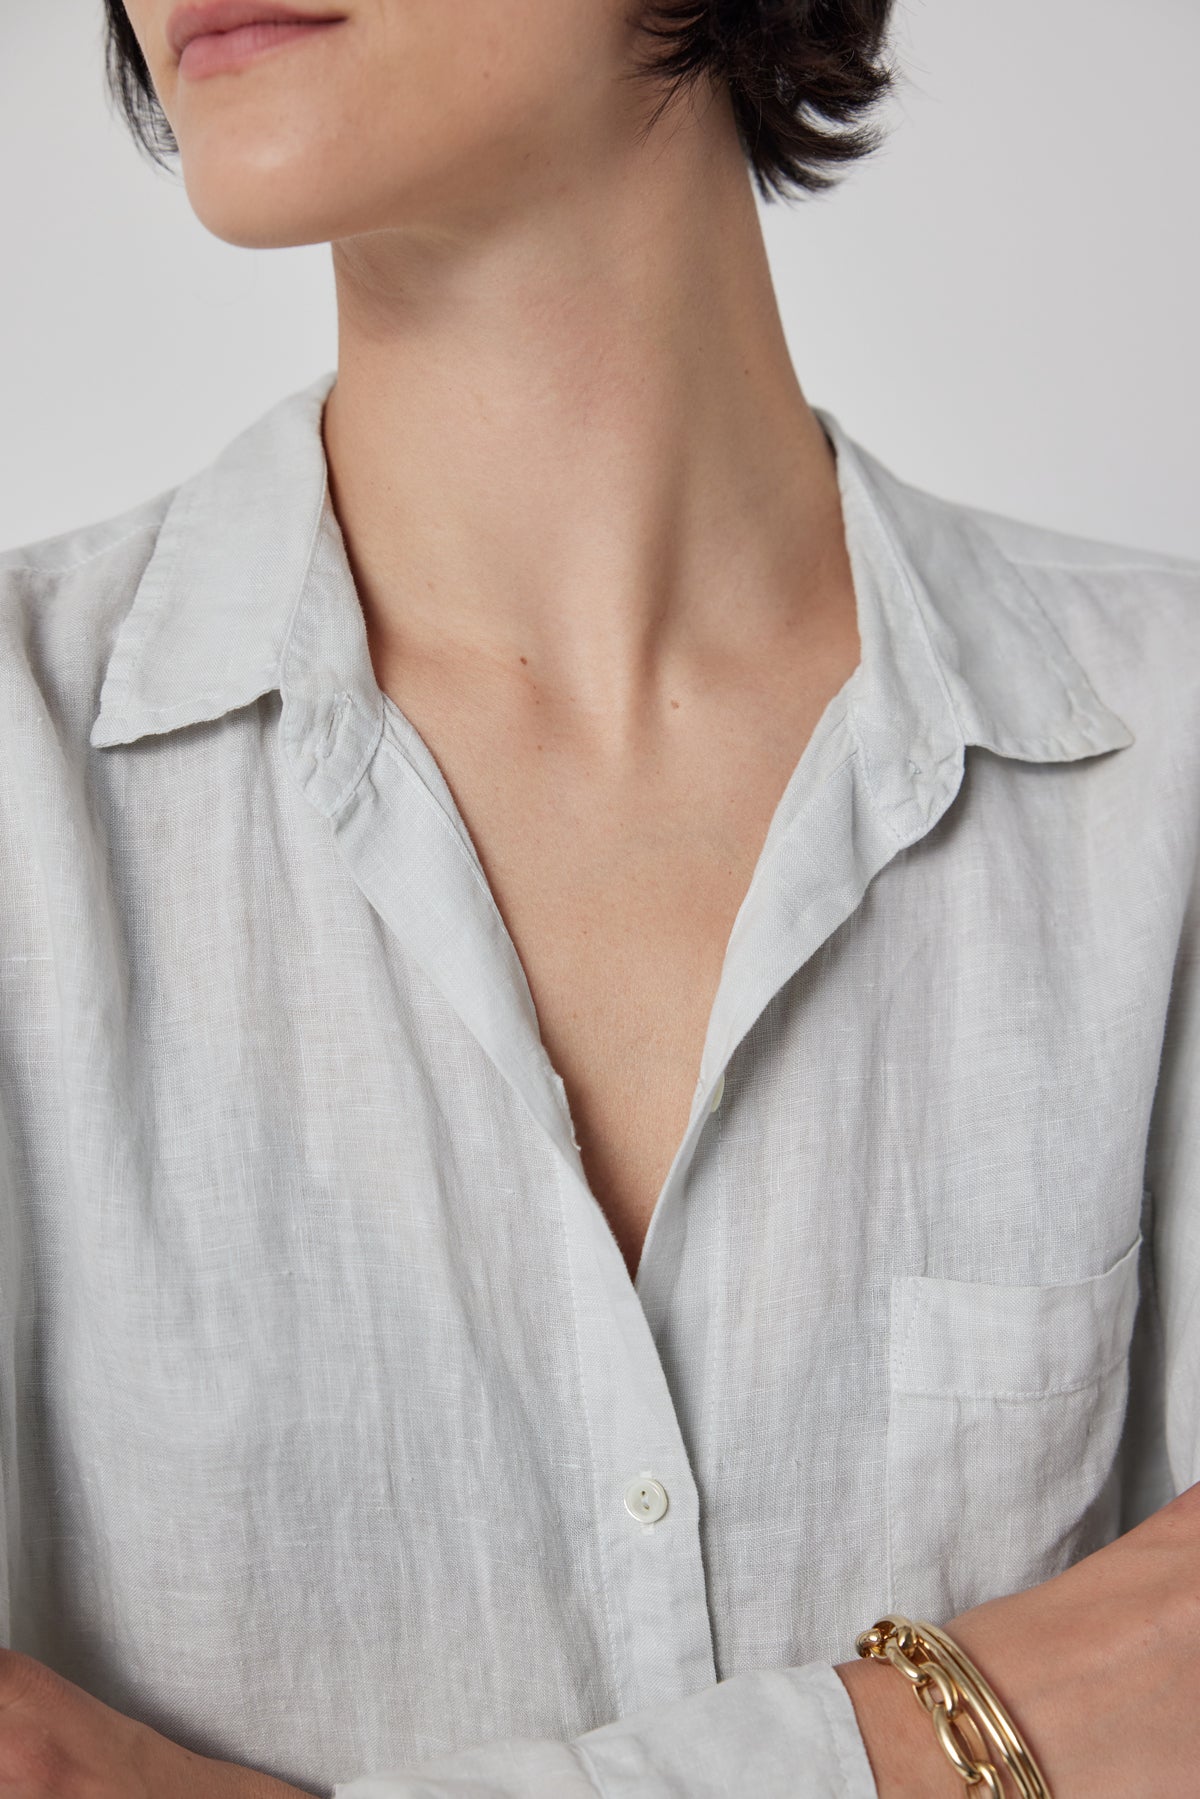   Close-up of a person wearing the Velvet by Jenny Graham MULHOLLAND LINEN SHIRT with a chest pocket. The person has short, dark hair and is accessorizing with a gold bracelet. The relaxed silhouette of the shirt features a scooped hemline. The background is plain white. 